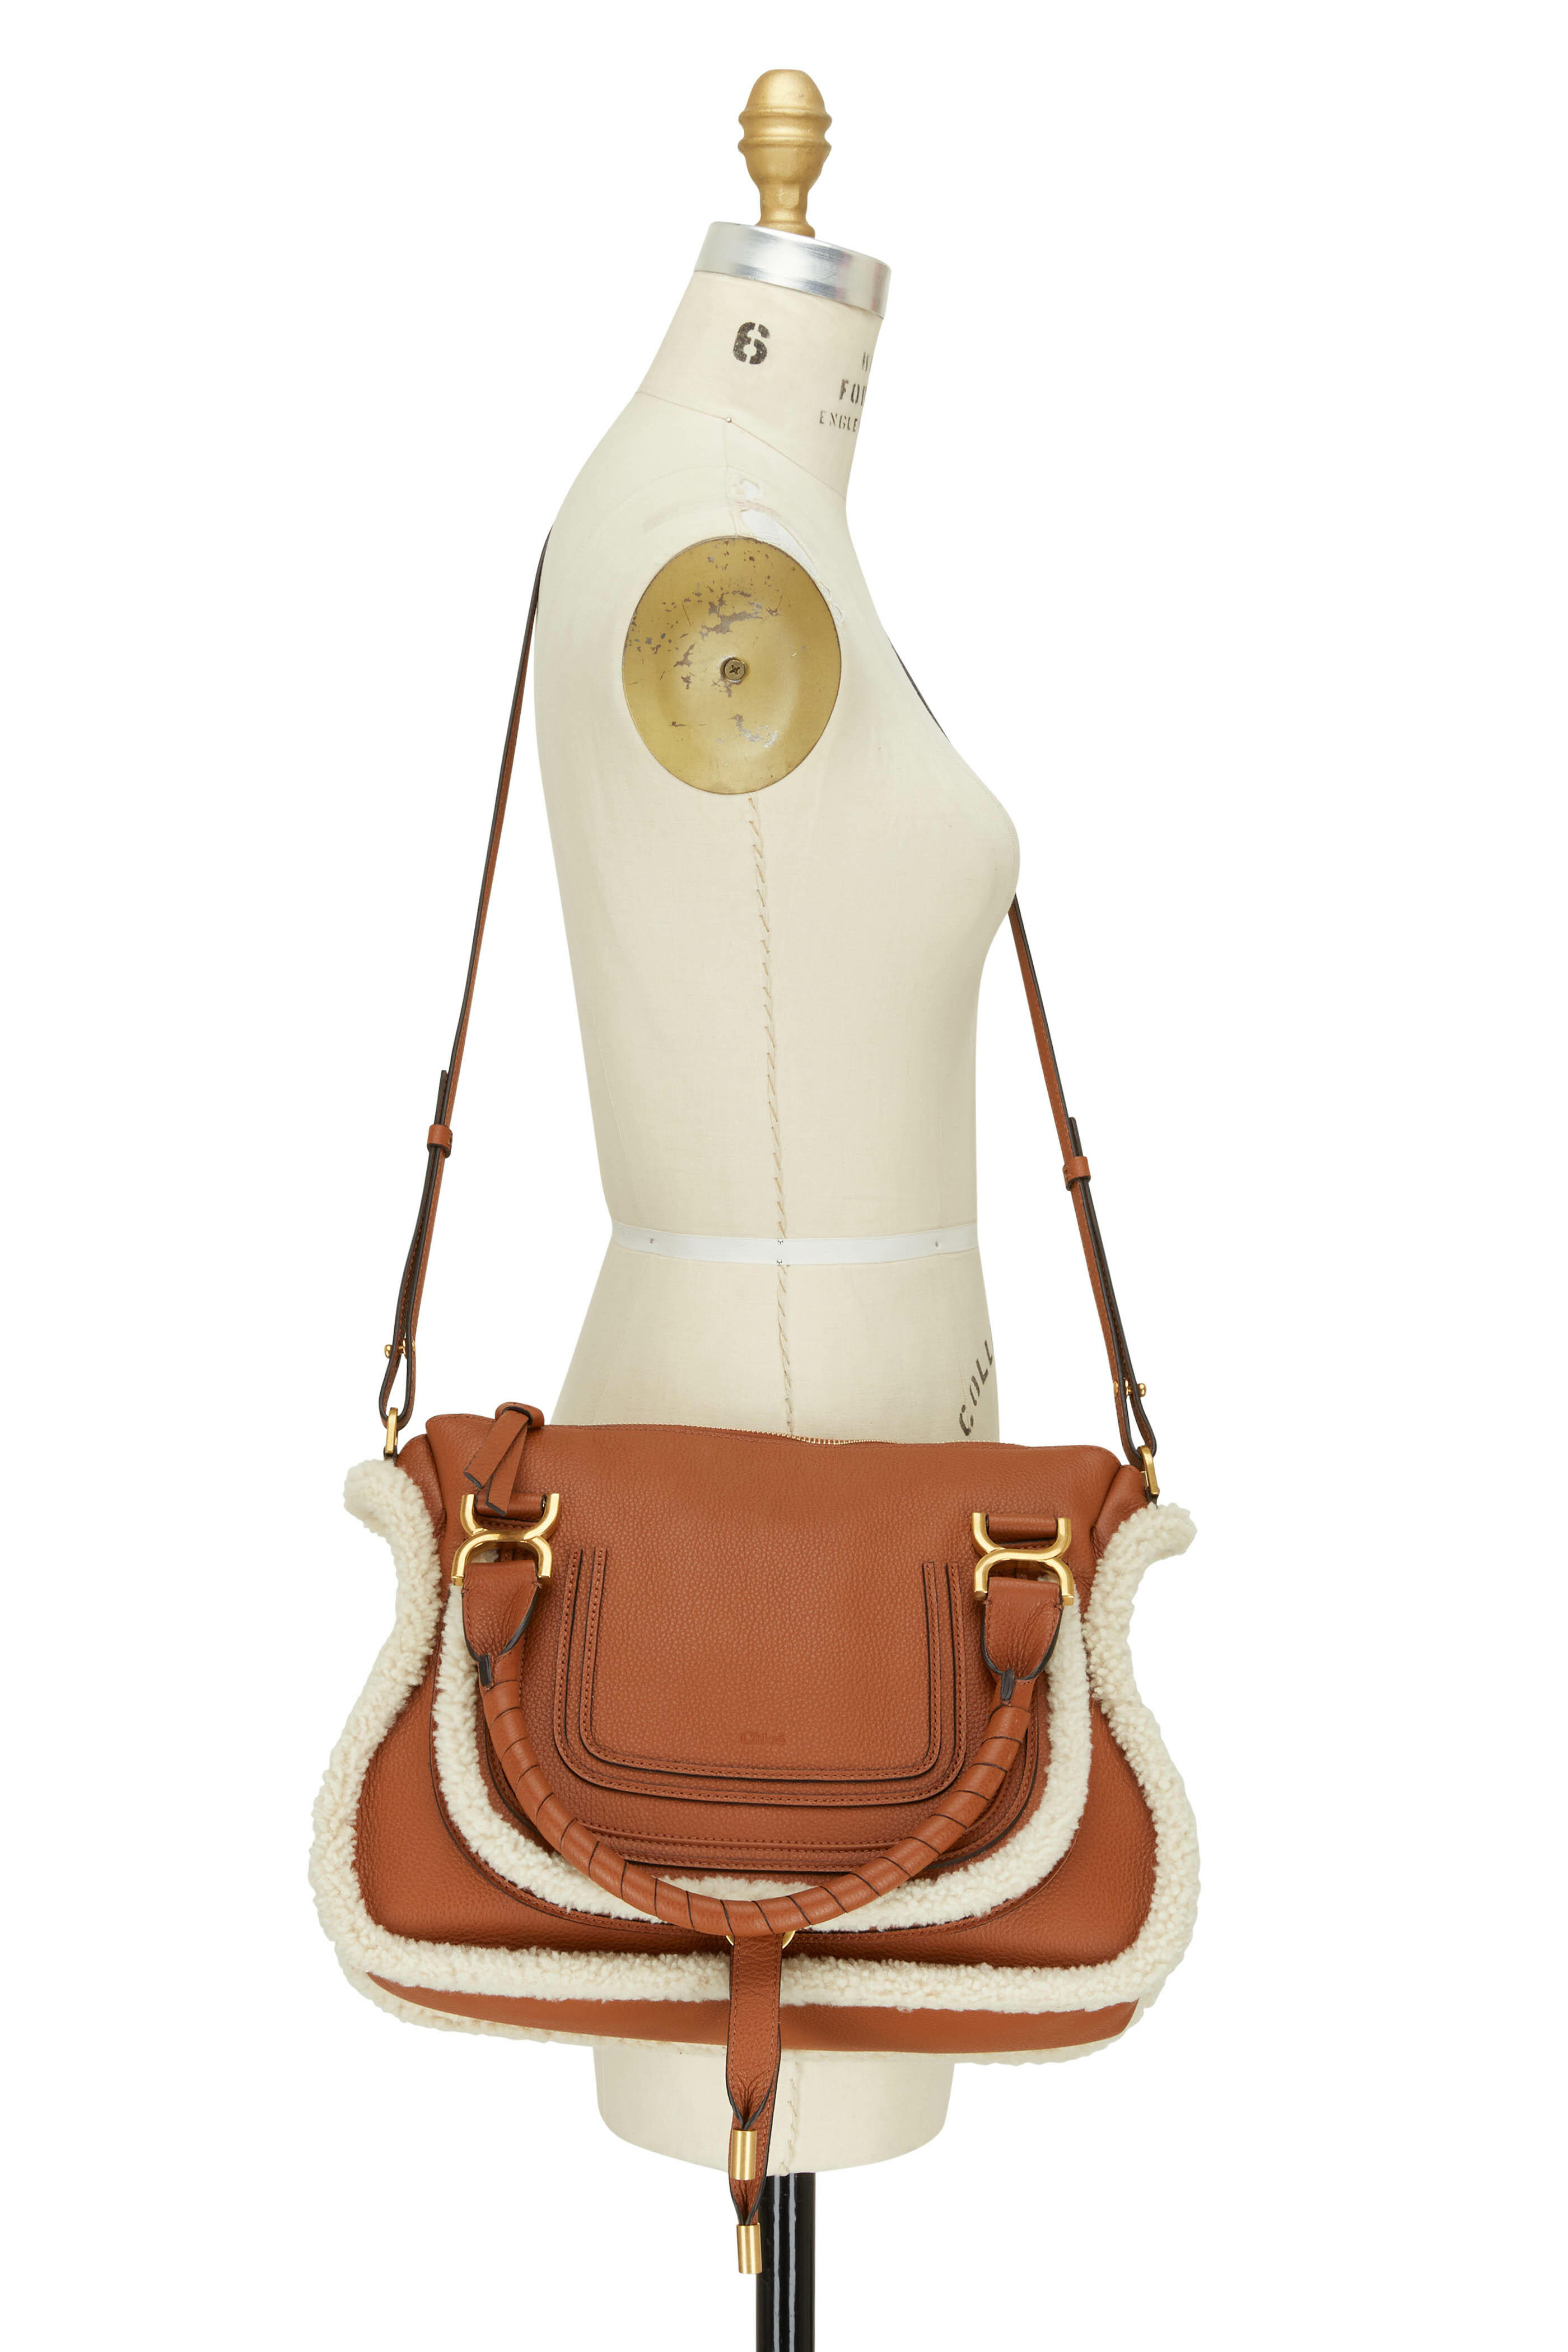 East-West California Bag in suede leather with shearling